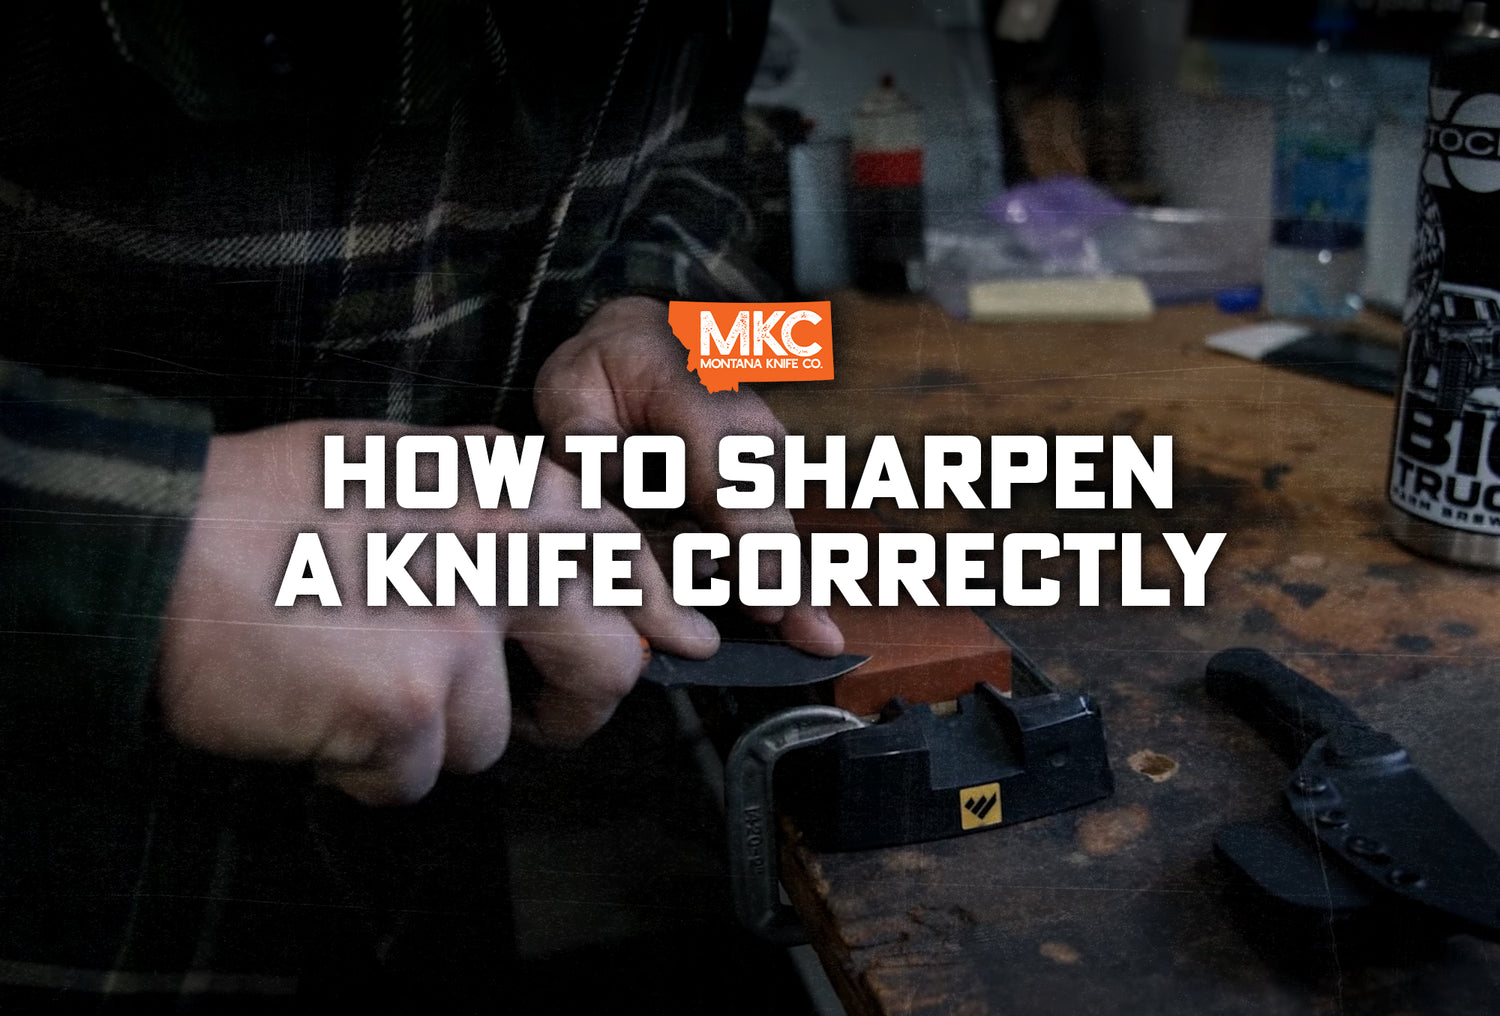 Josh Smith uses a whetstone to demonstrate how to sharpen a knife correctly.